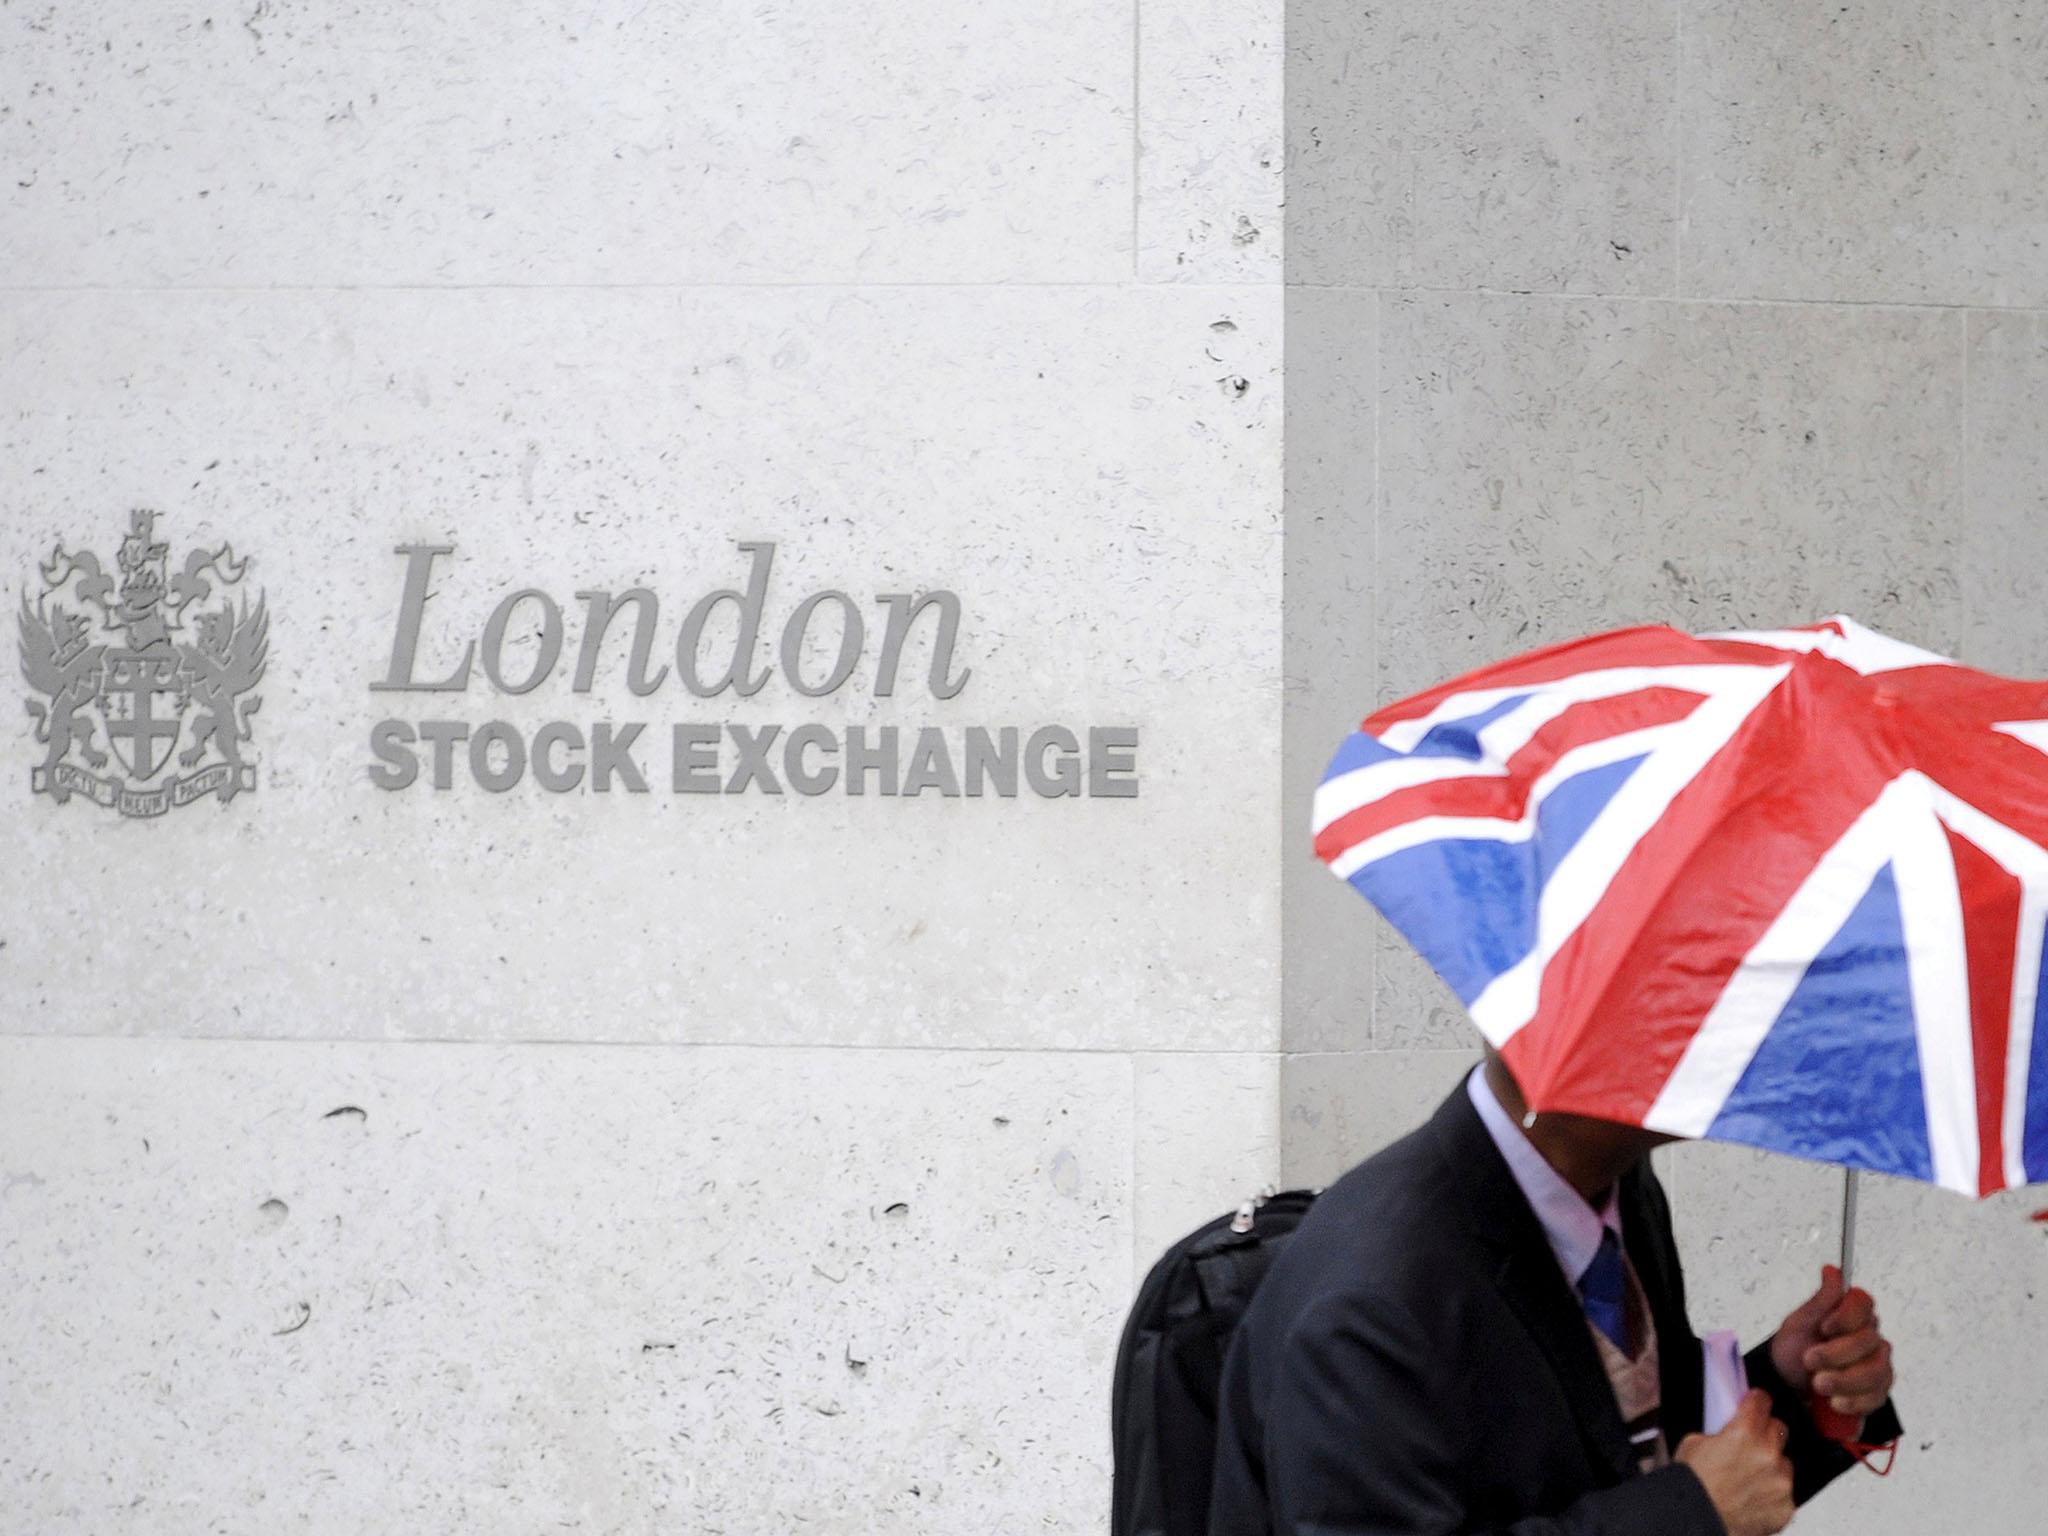 The FTSE 100 ended the session around 0.7 per cent lower on the day, but losses were largely seen as unrelated to the devastating attacks